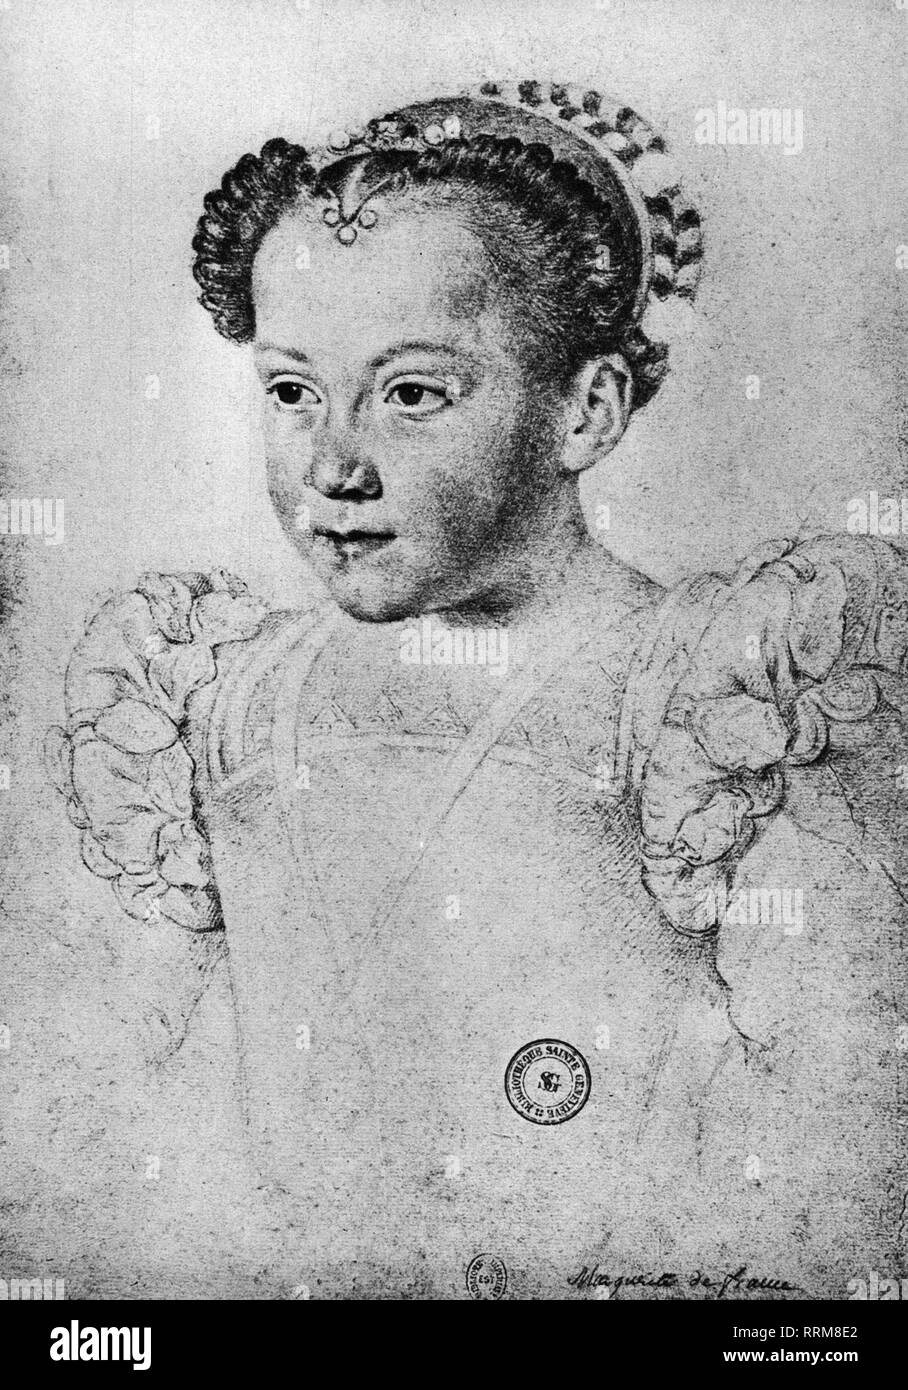 Marie Elisabeth of Valois, 27.10.1572 - 9.4.1578, Princess of France, daughter of King Charles IX, portrait, drawing, circa 1777/1778, Bibliotheque Nationale, Paris, Additional-Rights-Clearance-Info-Not-Available Stock Photo